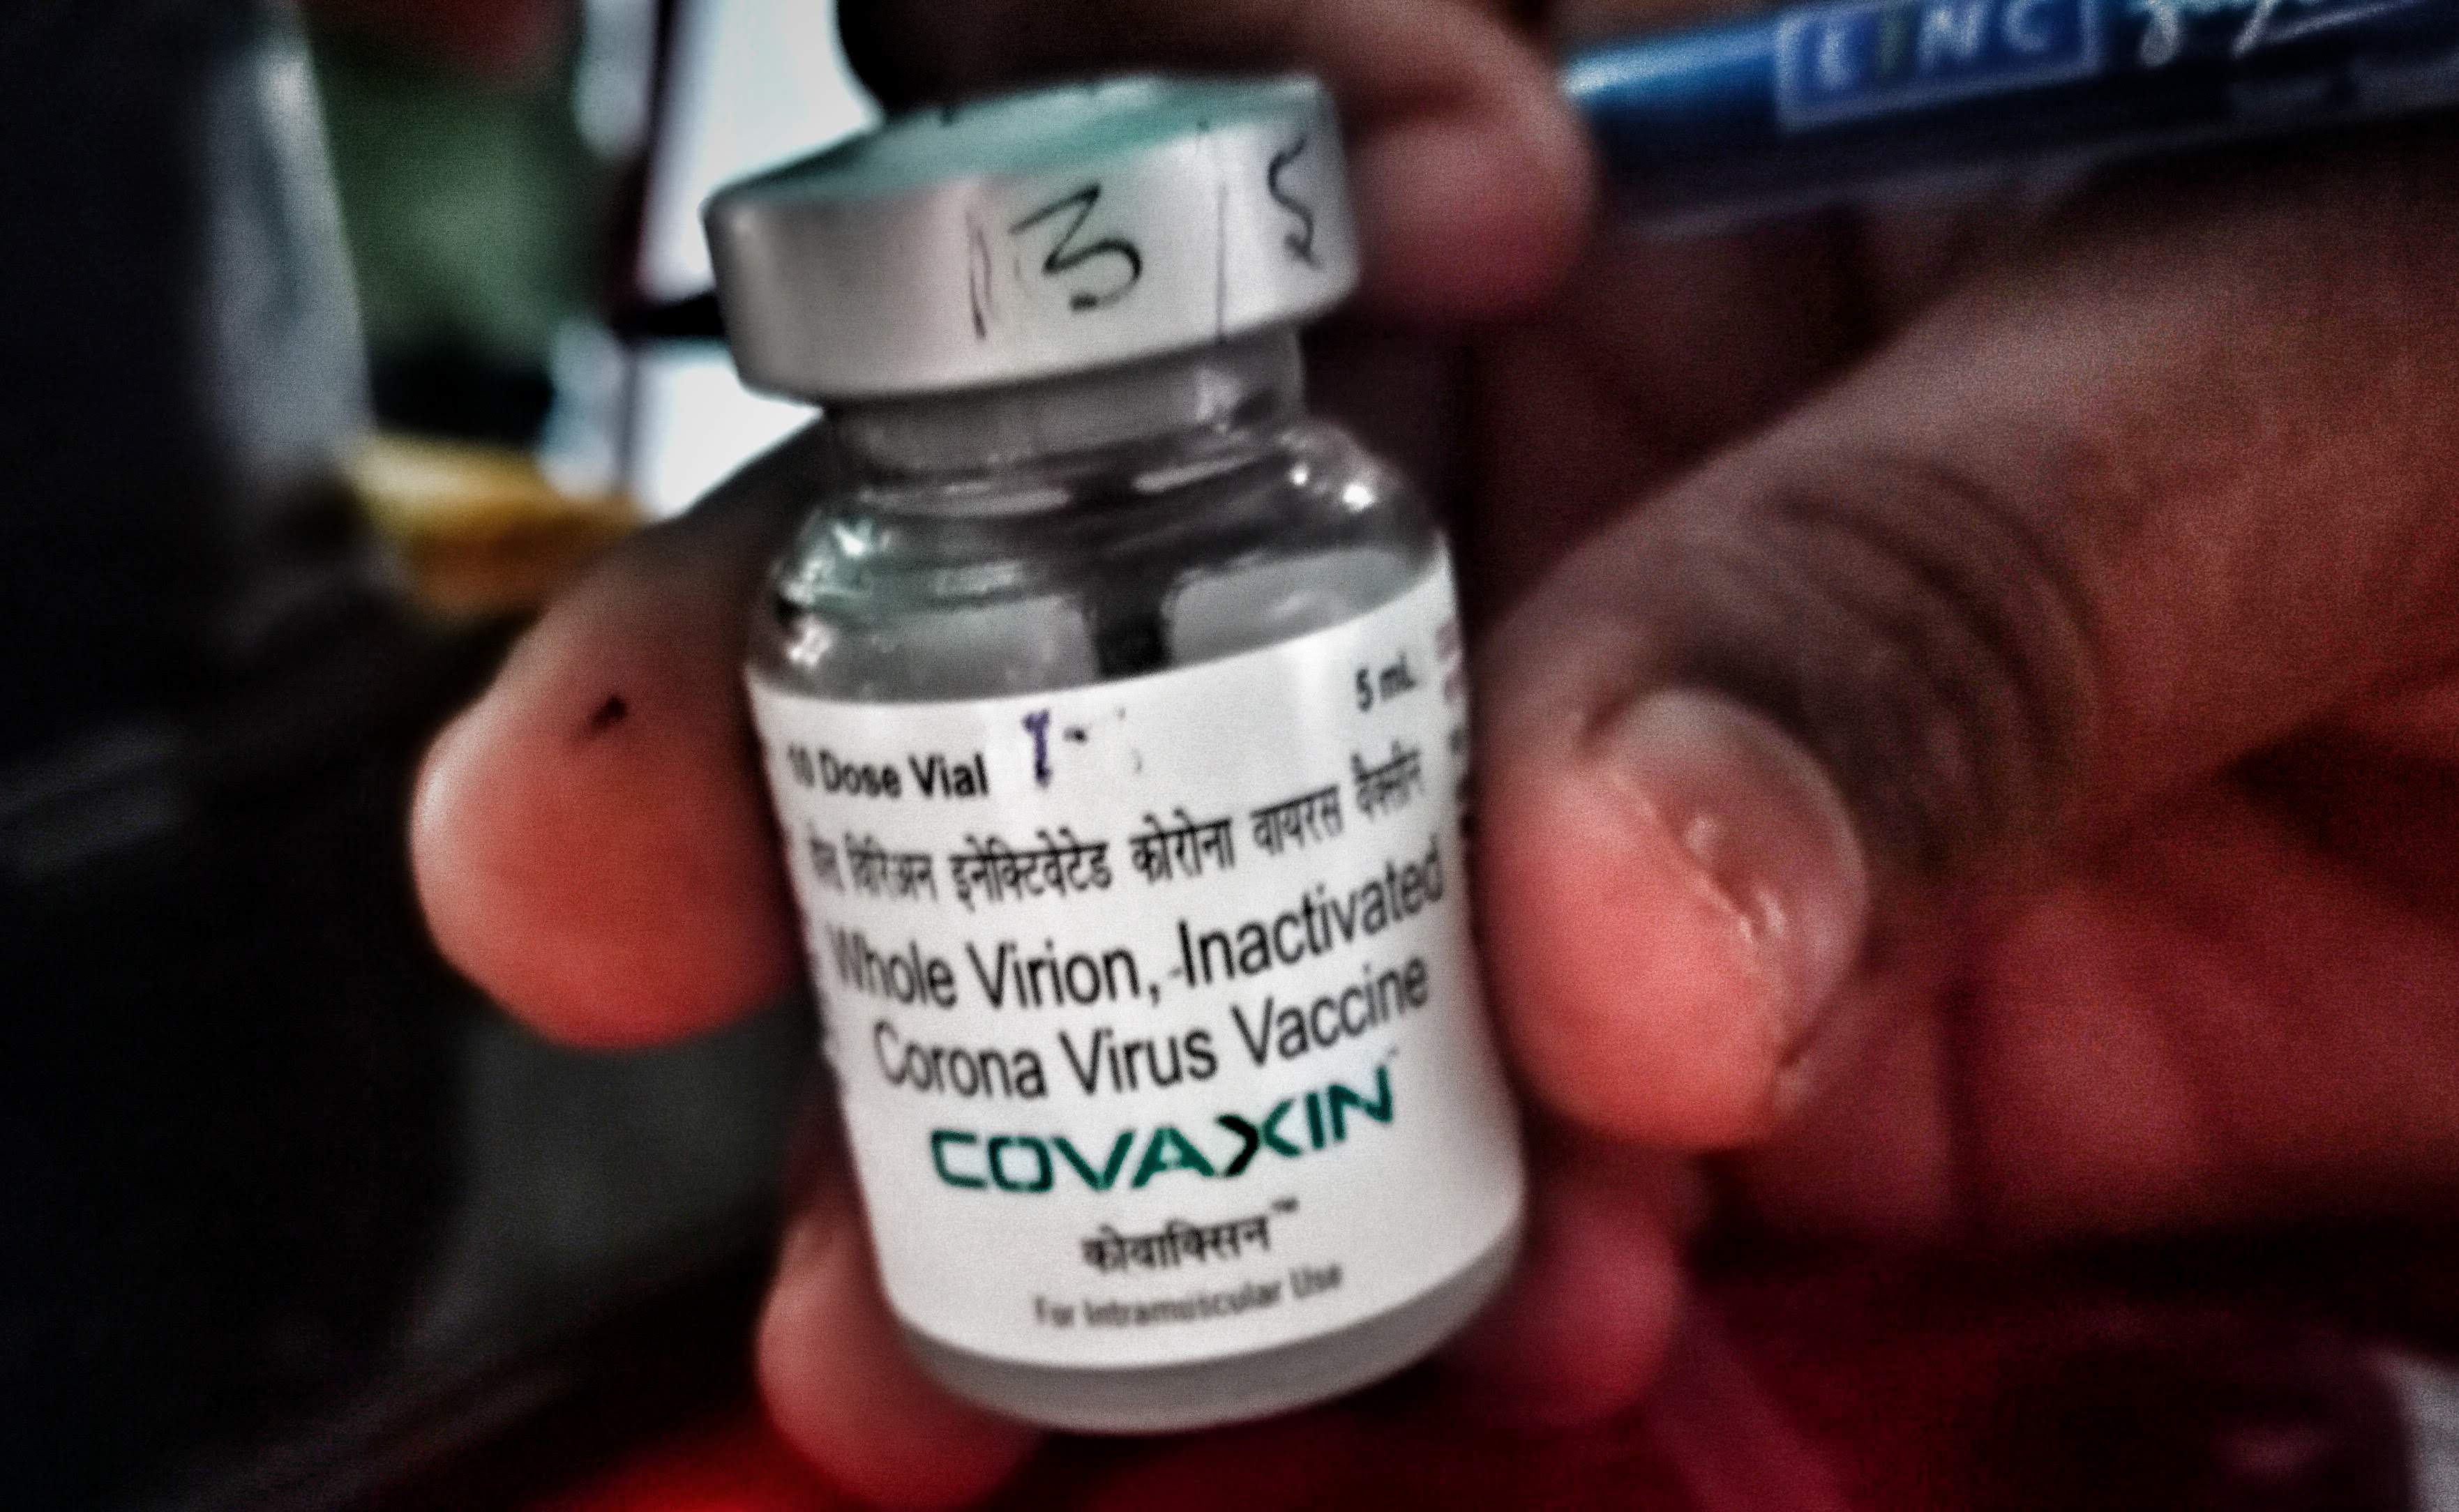 The Lancet found that covaxin works best against corona